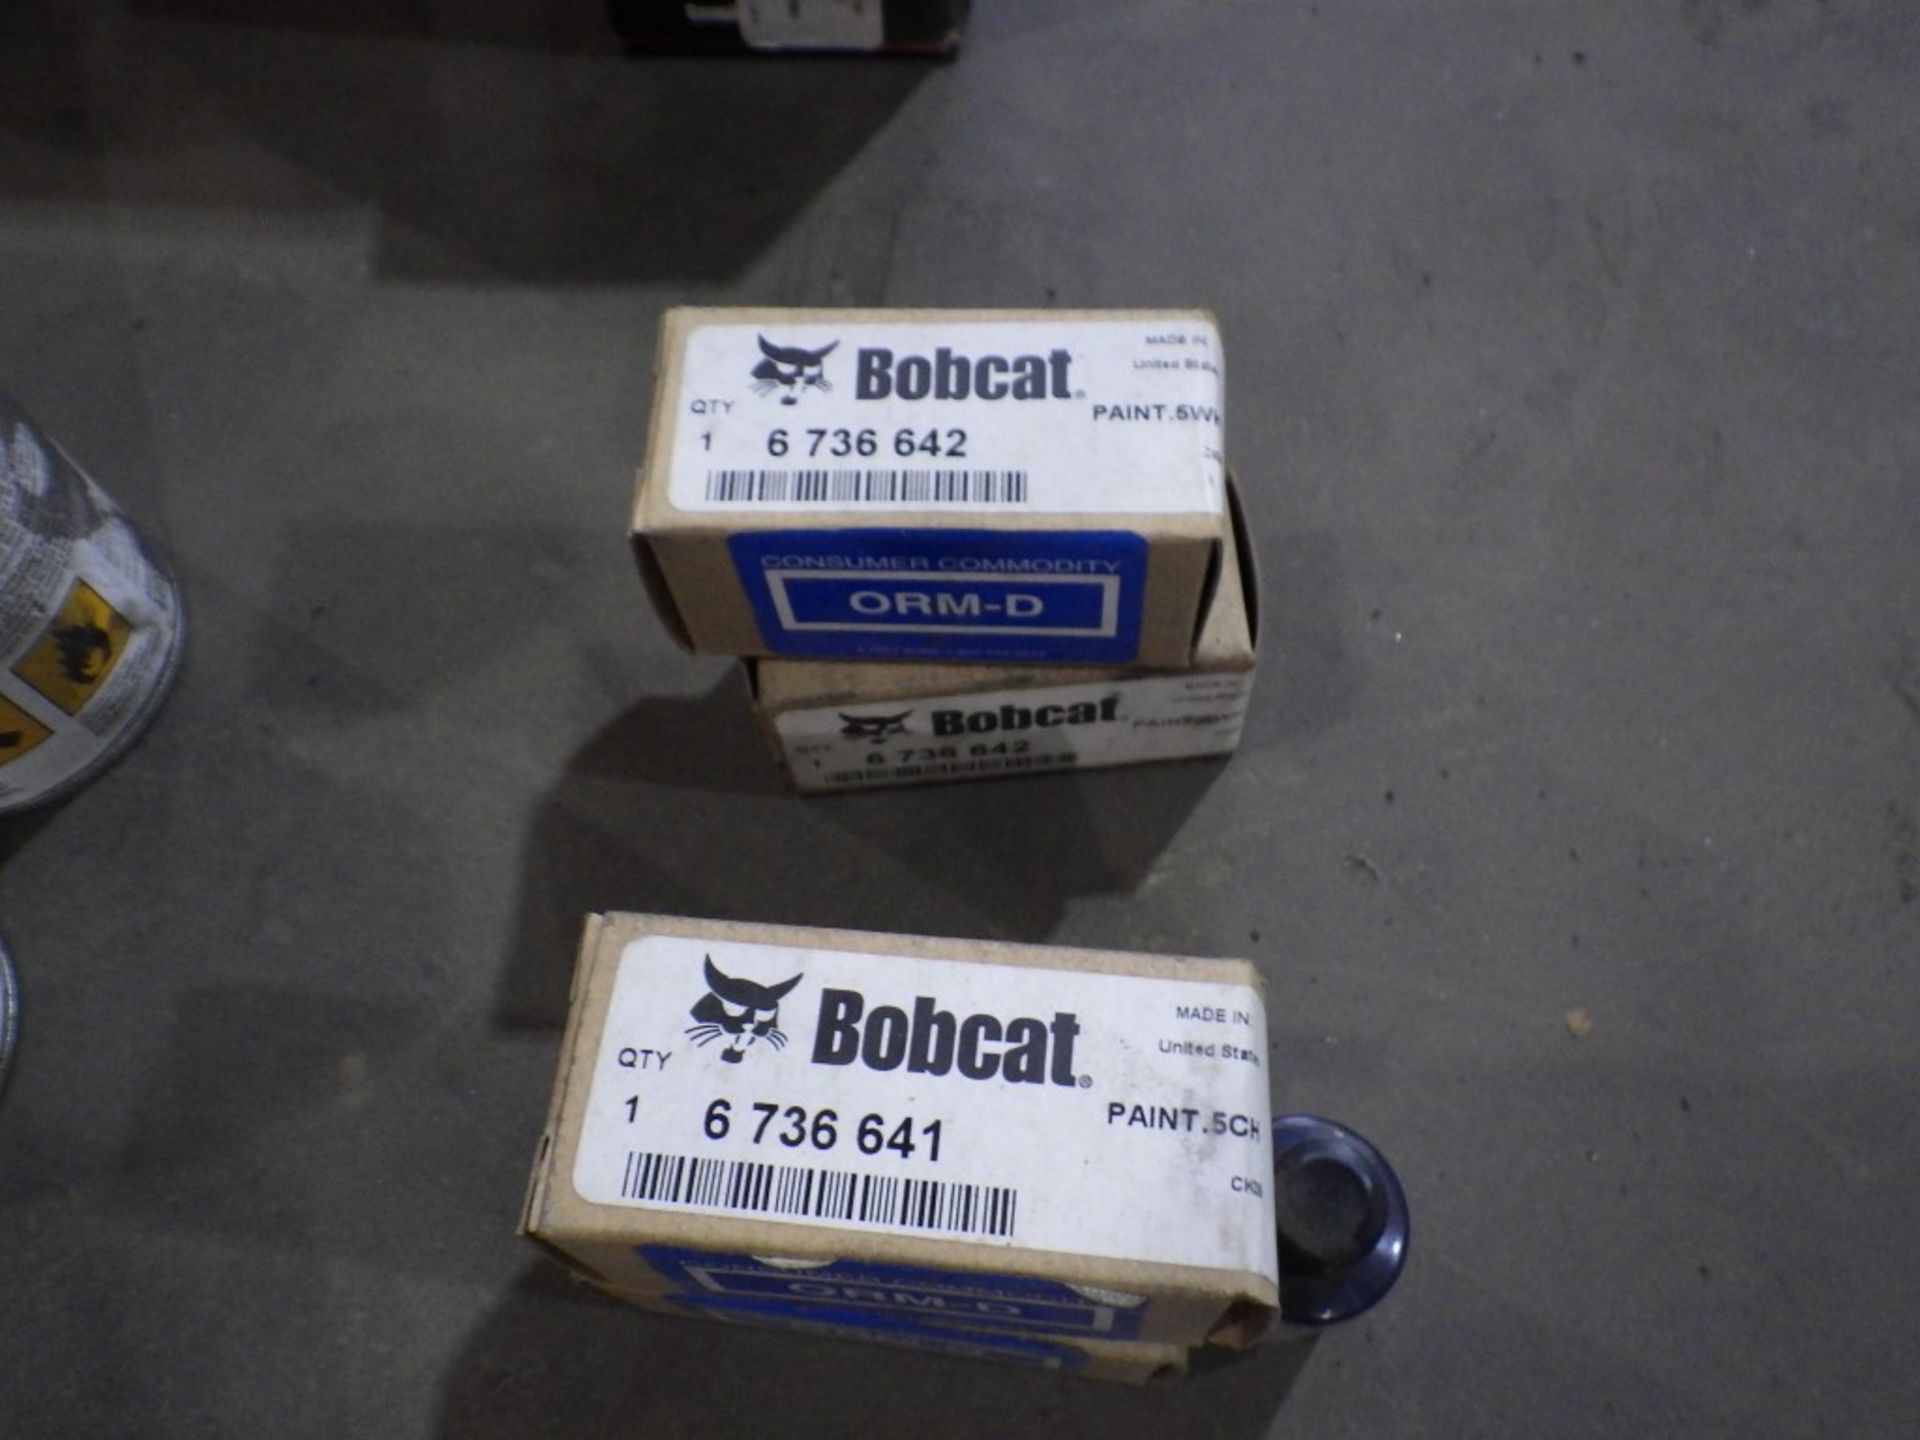 ASSORTED BOBCAT DECALS & PAINT INCL. SPRAY CANS, ENAMEL, PRIMER & TOUCH UP BOTTLES - Image 4 of 8